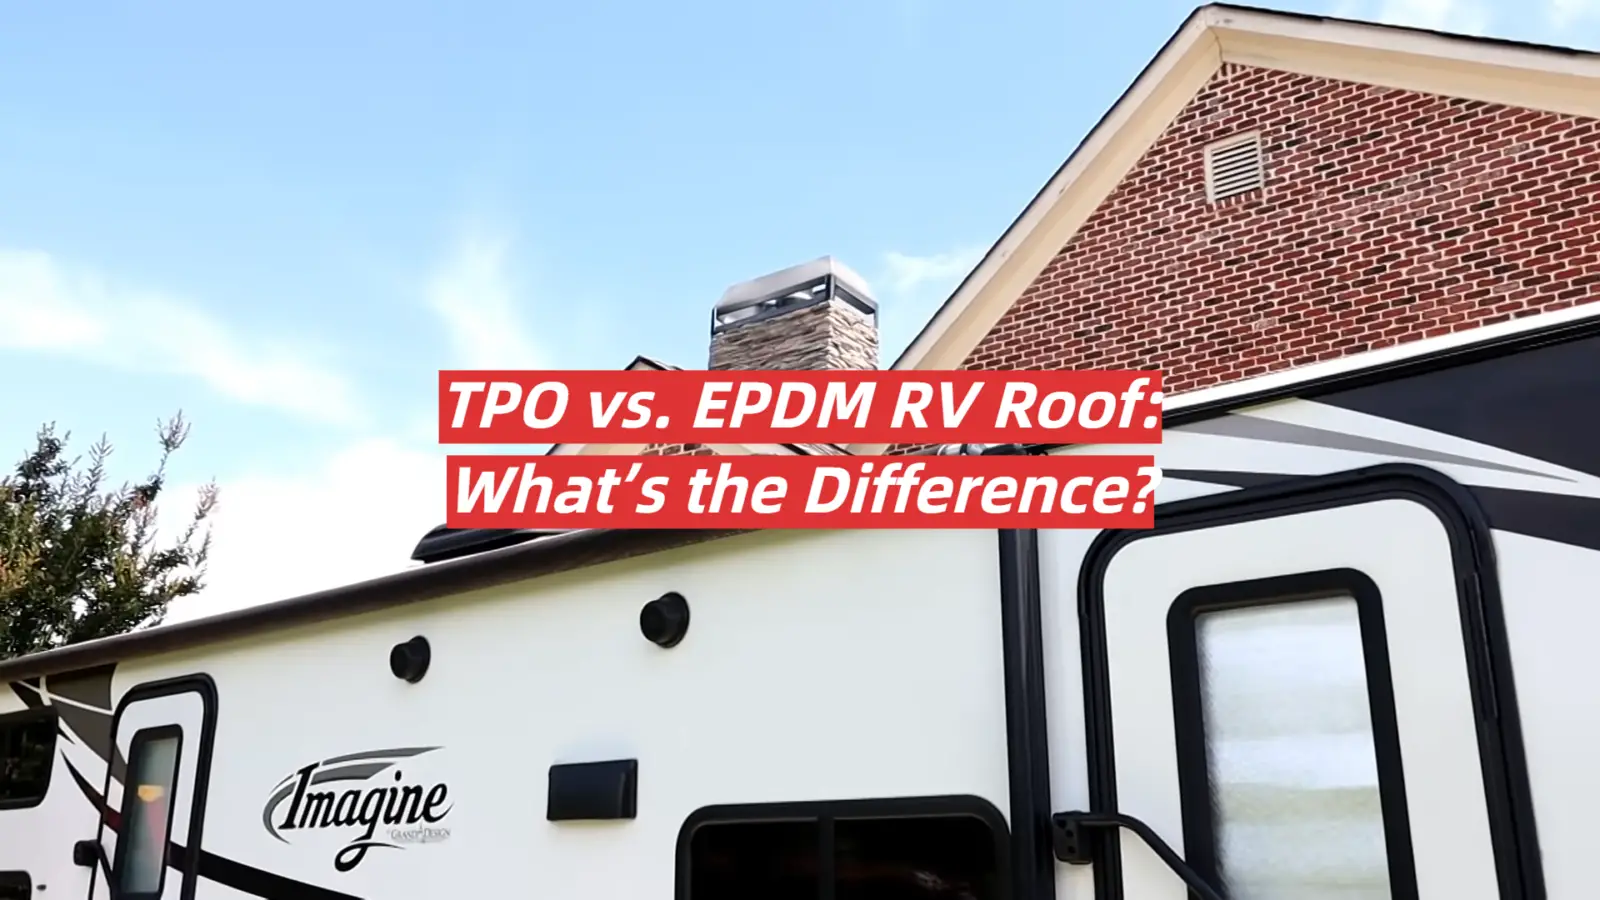 TPO vs. EPDM RV Roof: What’s the Difference?